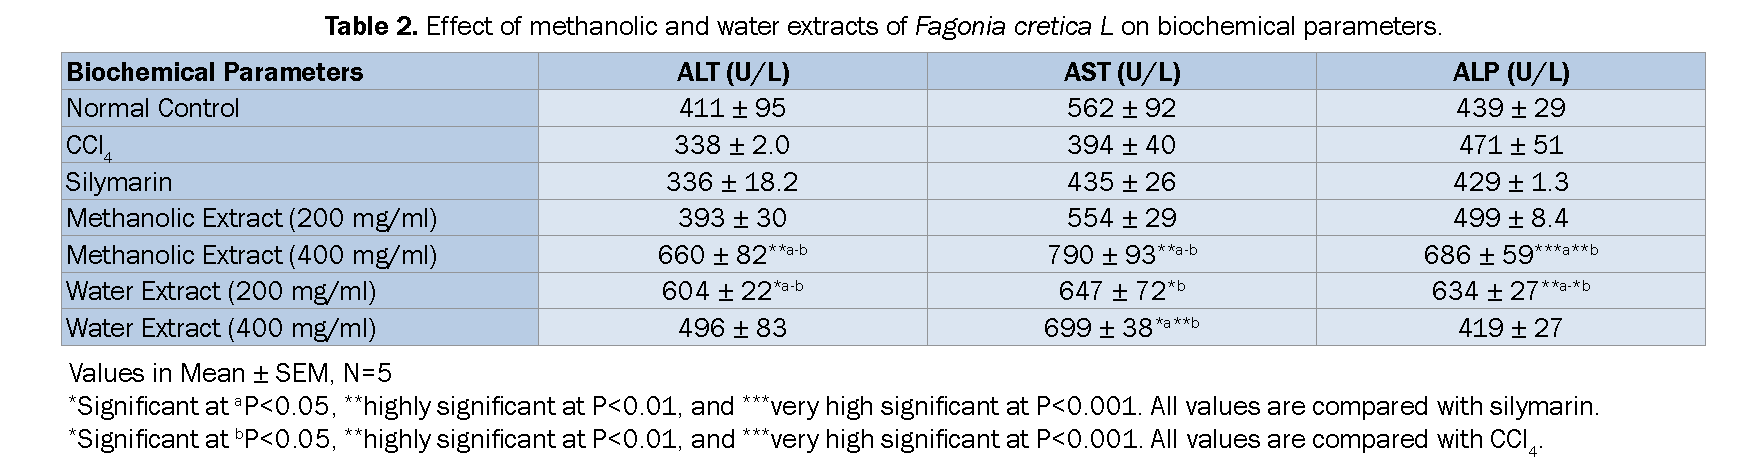 Pharmacognsoy-Phytochemistry-Effect-methanolic-and-water-extracts-Fagonia-cretica-L